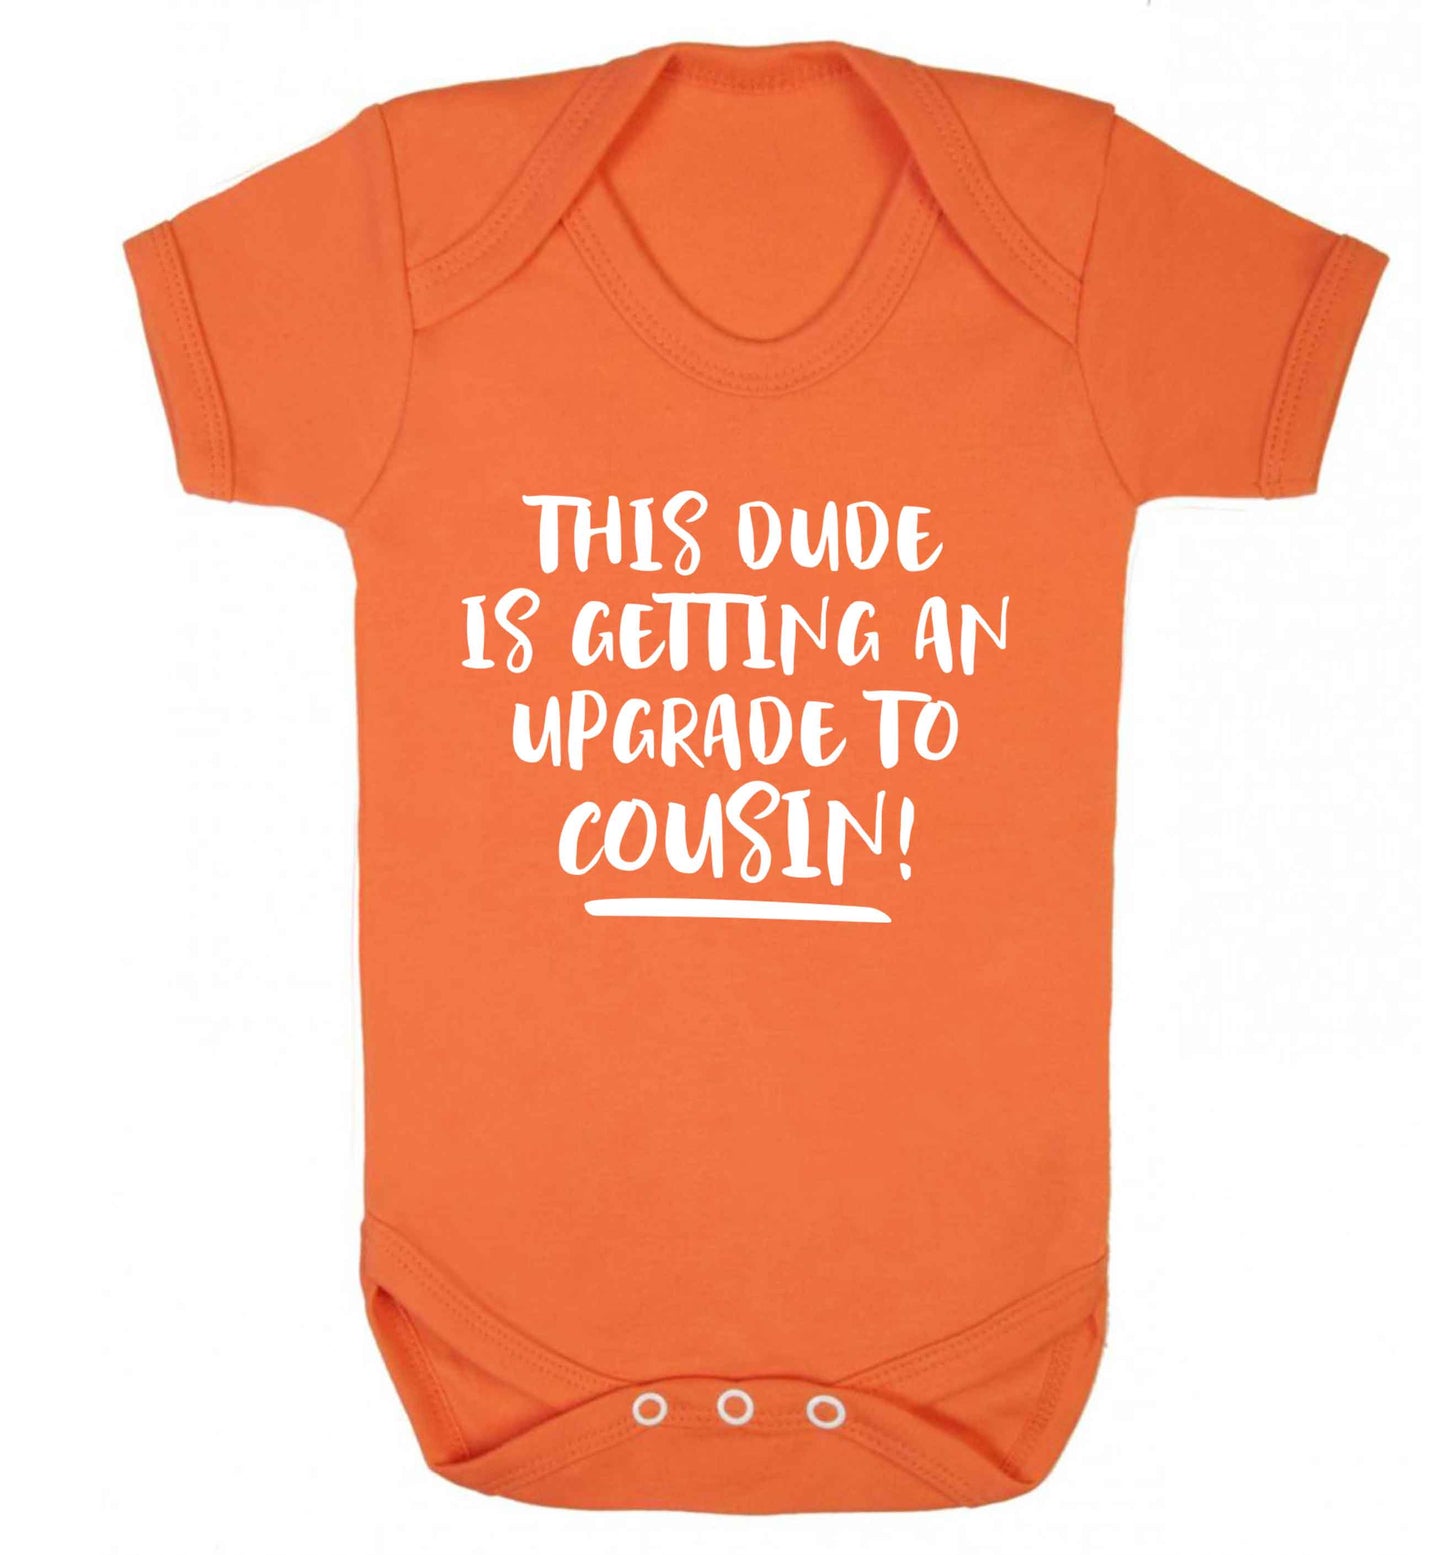 This dude is getting an upgrade to cousin! Baby Vest orange 18-24 months